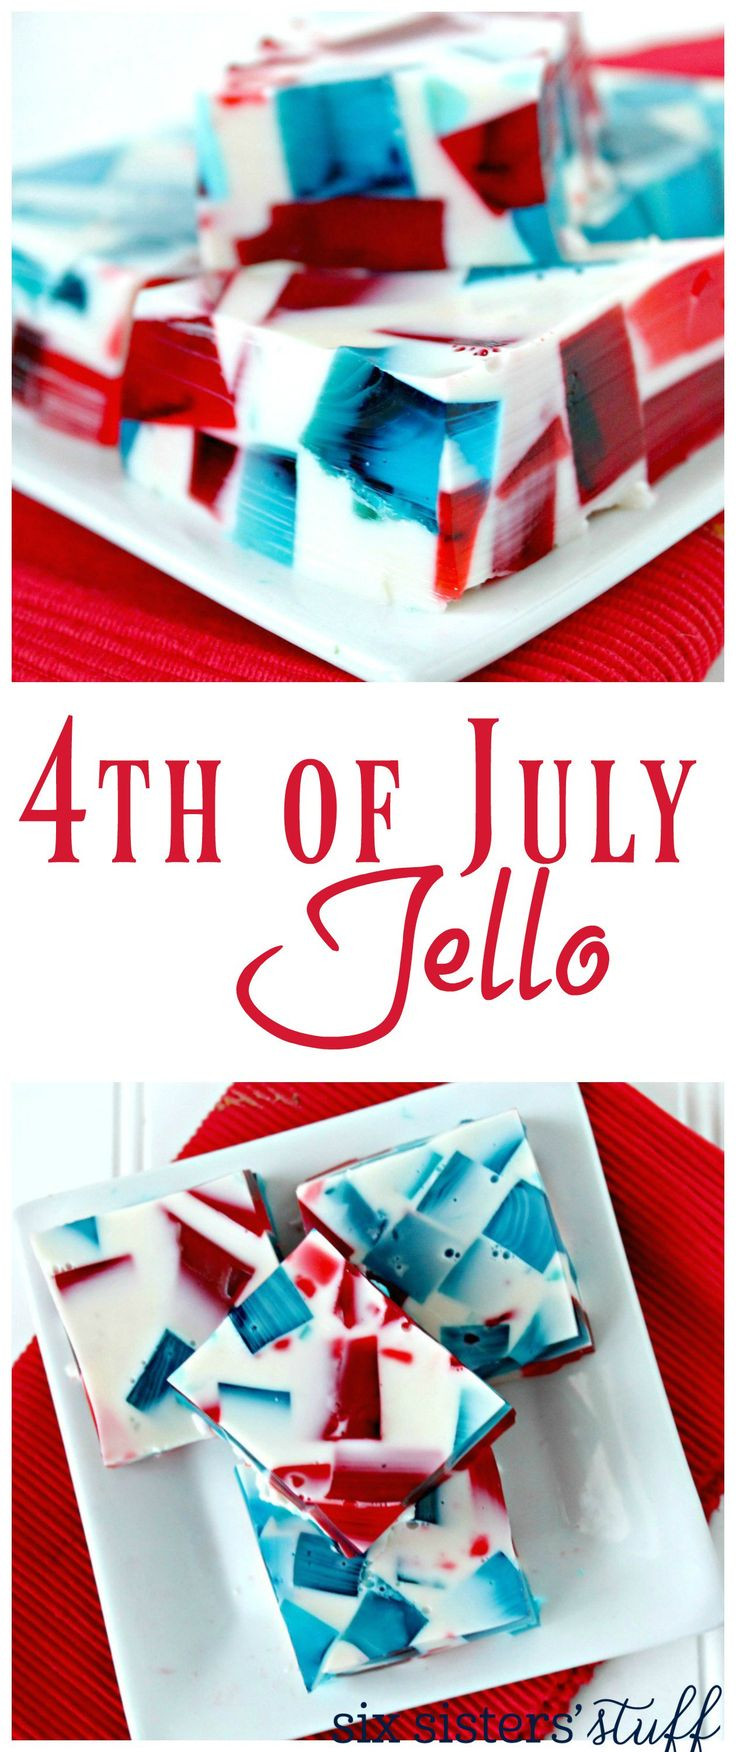 4th Of July Vacation Ideas
 190 best CELEBRATE 4th of July images on Pinterest